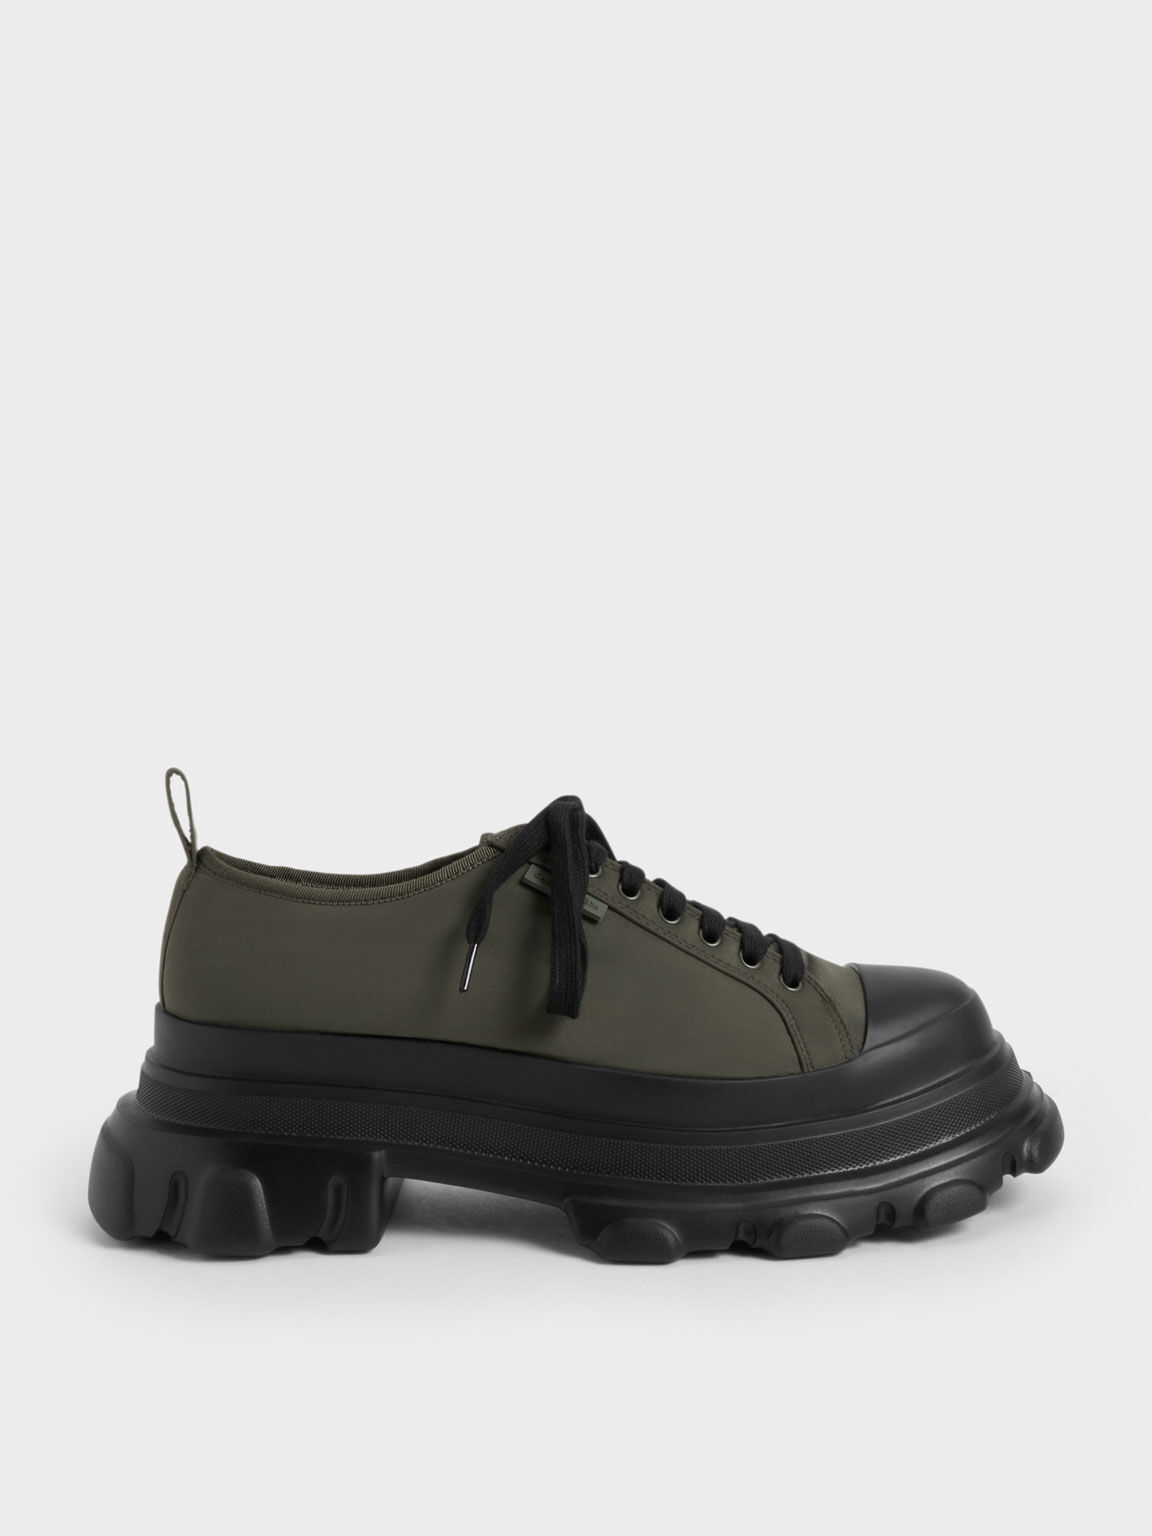 Nylon Chunky Sole Sneakers, Olive, hi-res